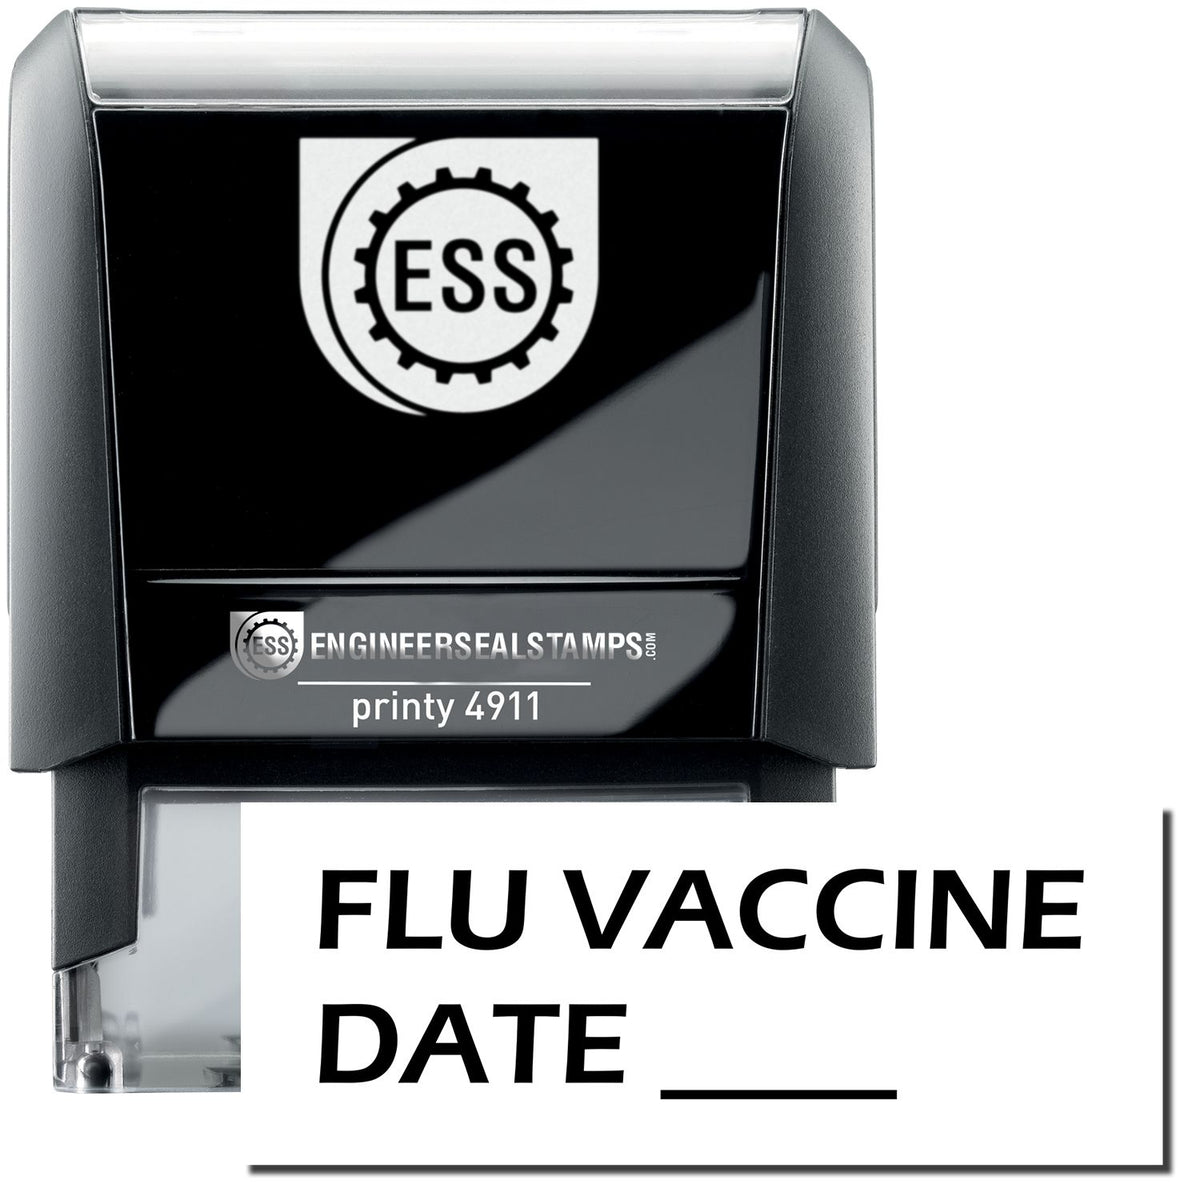 A self-inking stamp with a stamped image showing how the text &quot;FLU VACCINE DATE&quot; with a line is displayed after stamping.